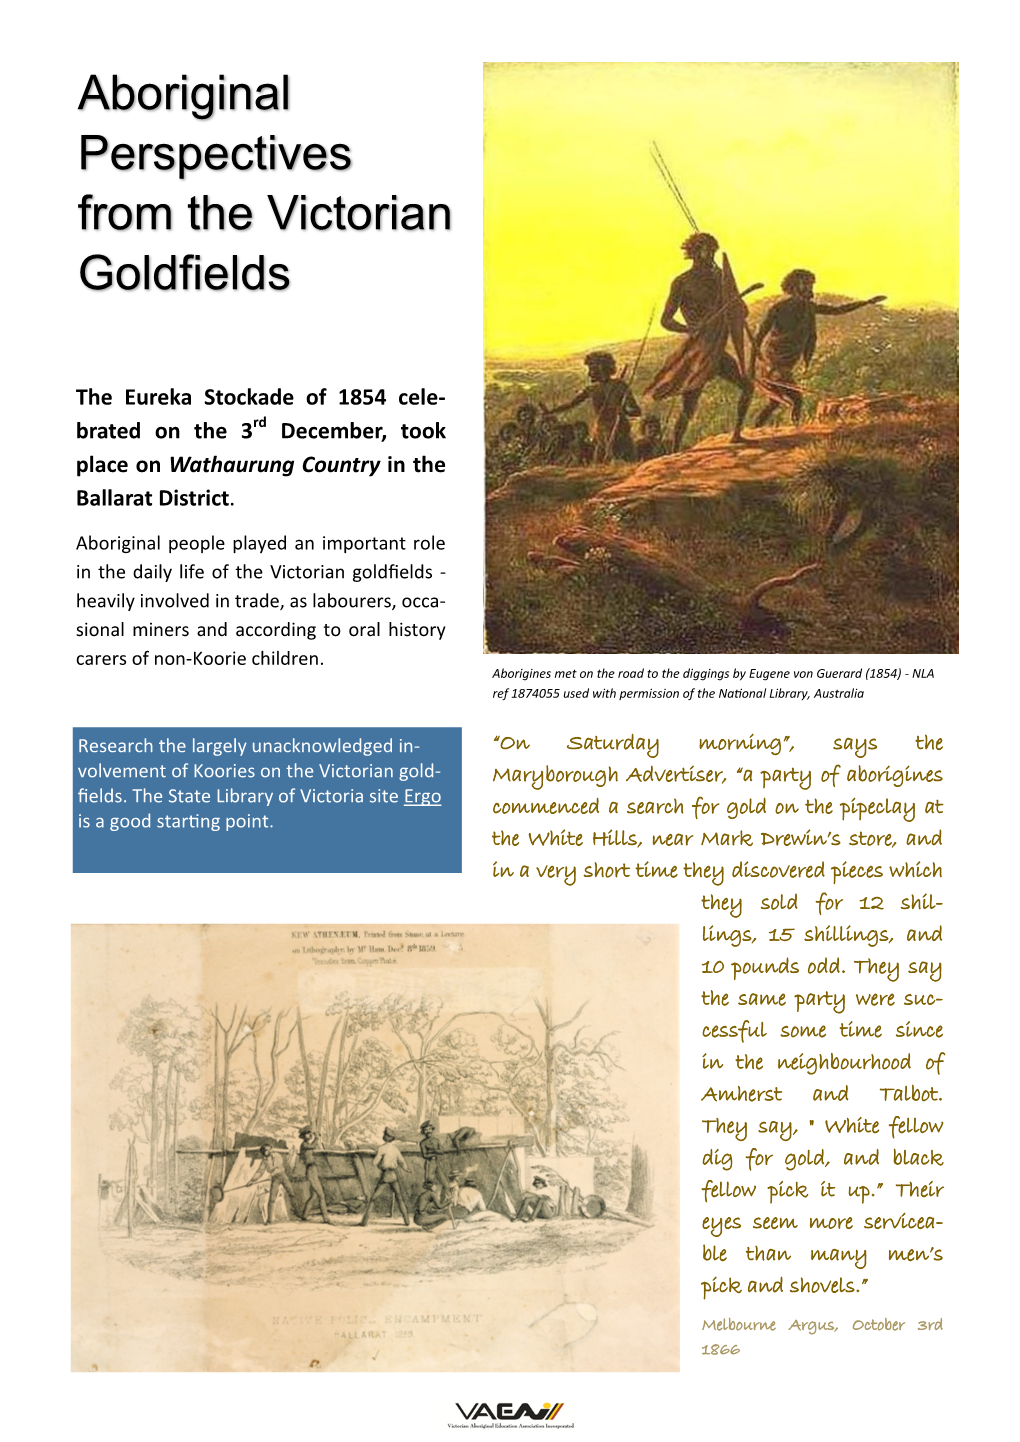 Aboriginal Perspectives from the Victorian Goldfields